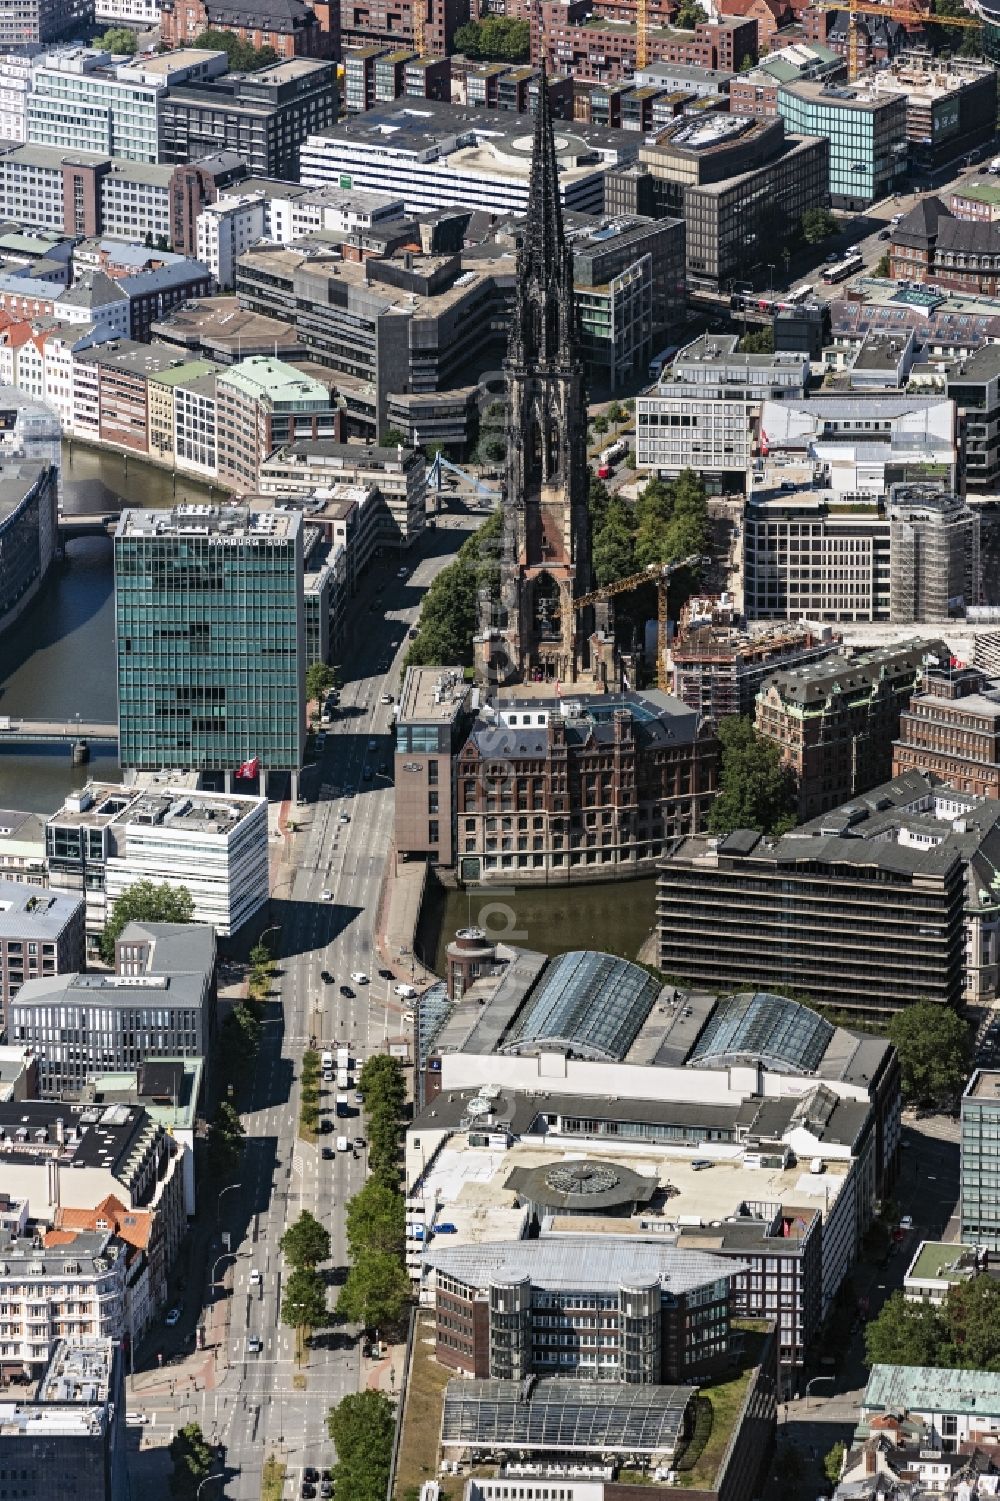 Hamburg from above - Church tower and tower roof at the church building of Mahnmal St. Nikolai on Willy-Brandt-Strasse in Hamburg, Germany